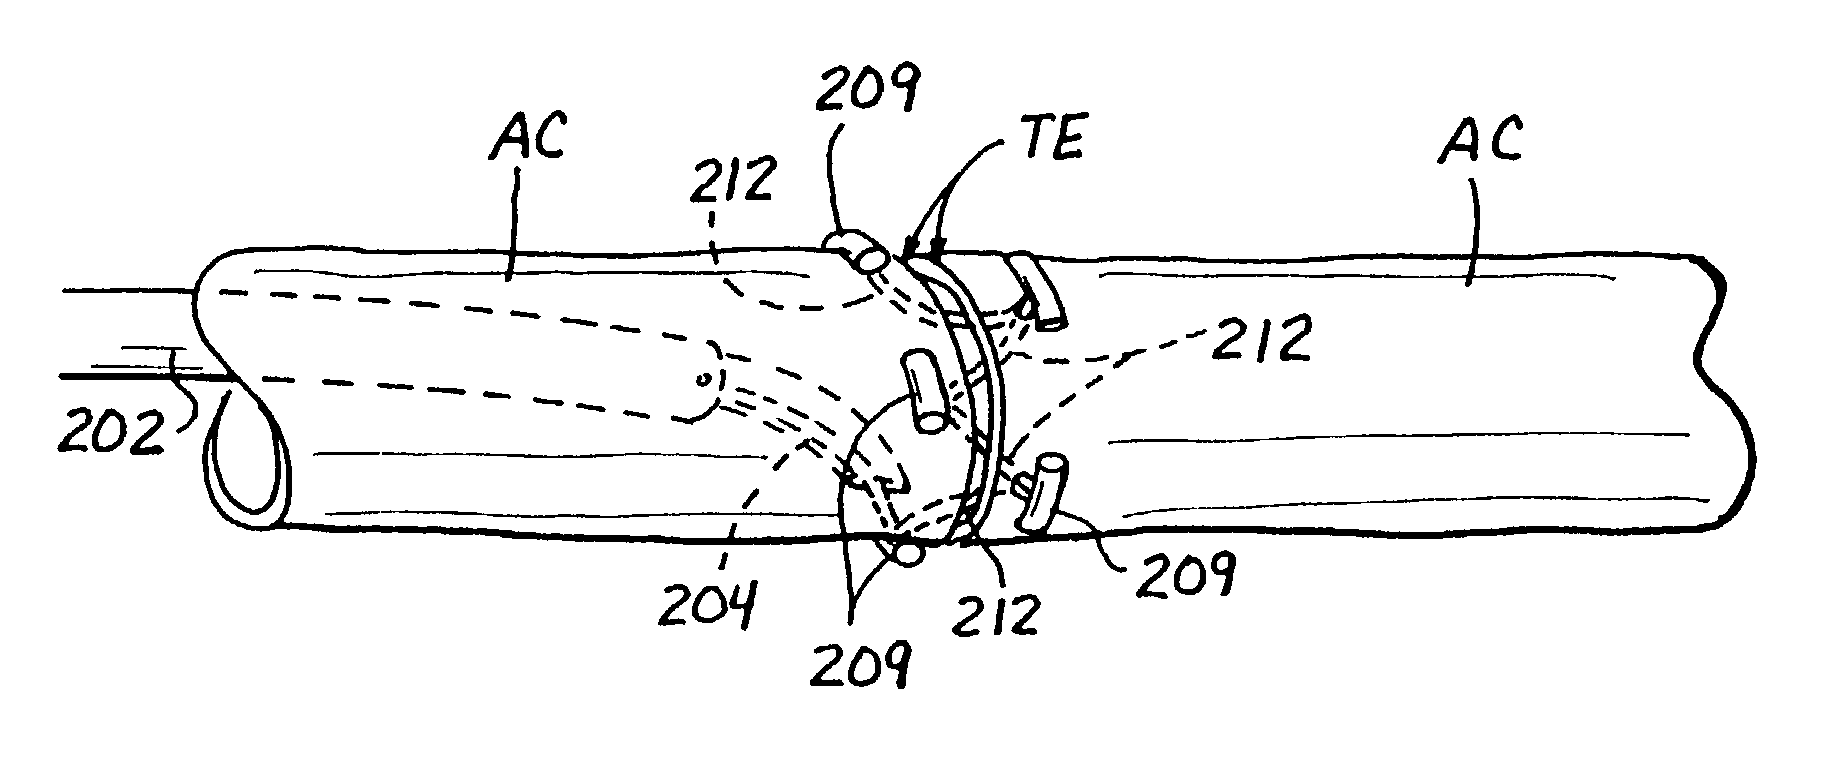 Transluminal methods and devices for closing, forming attachments to, and/or forming anastomotic junctions in, luminal anatomical structures